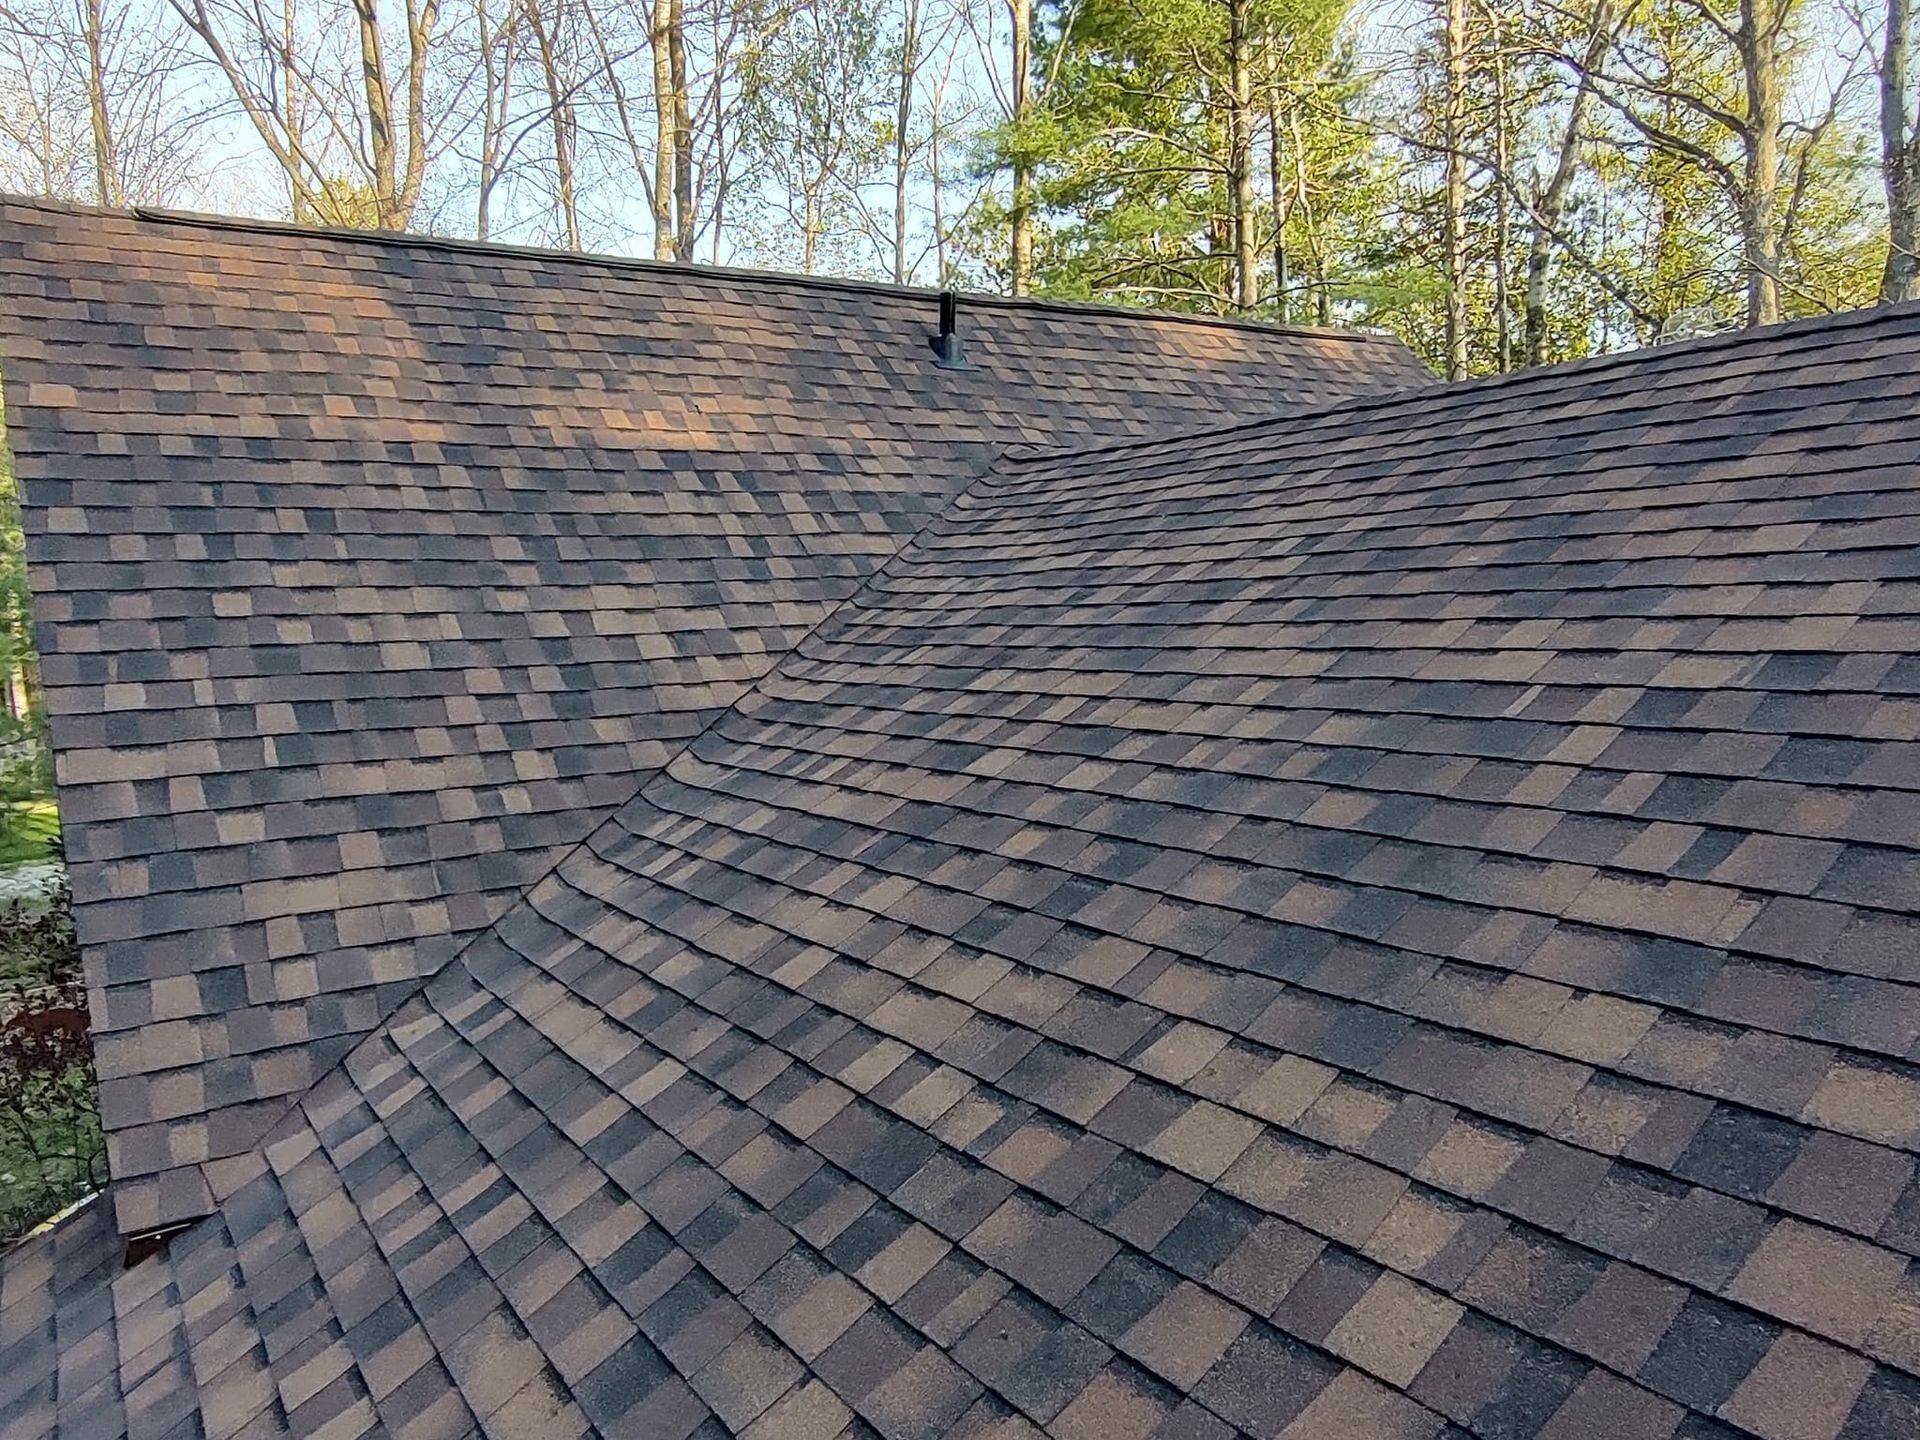 a close up of a roof with a lot of shingles and trees in the background .